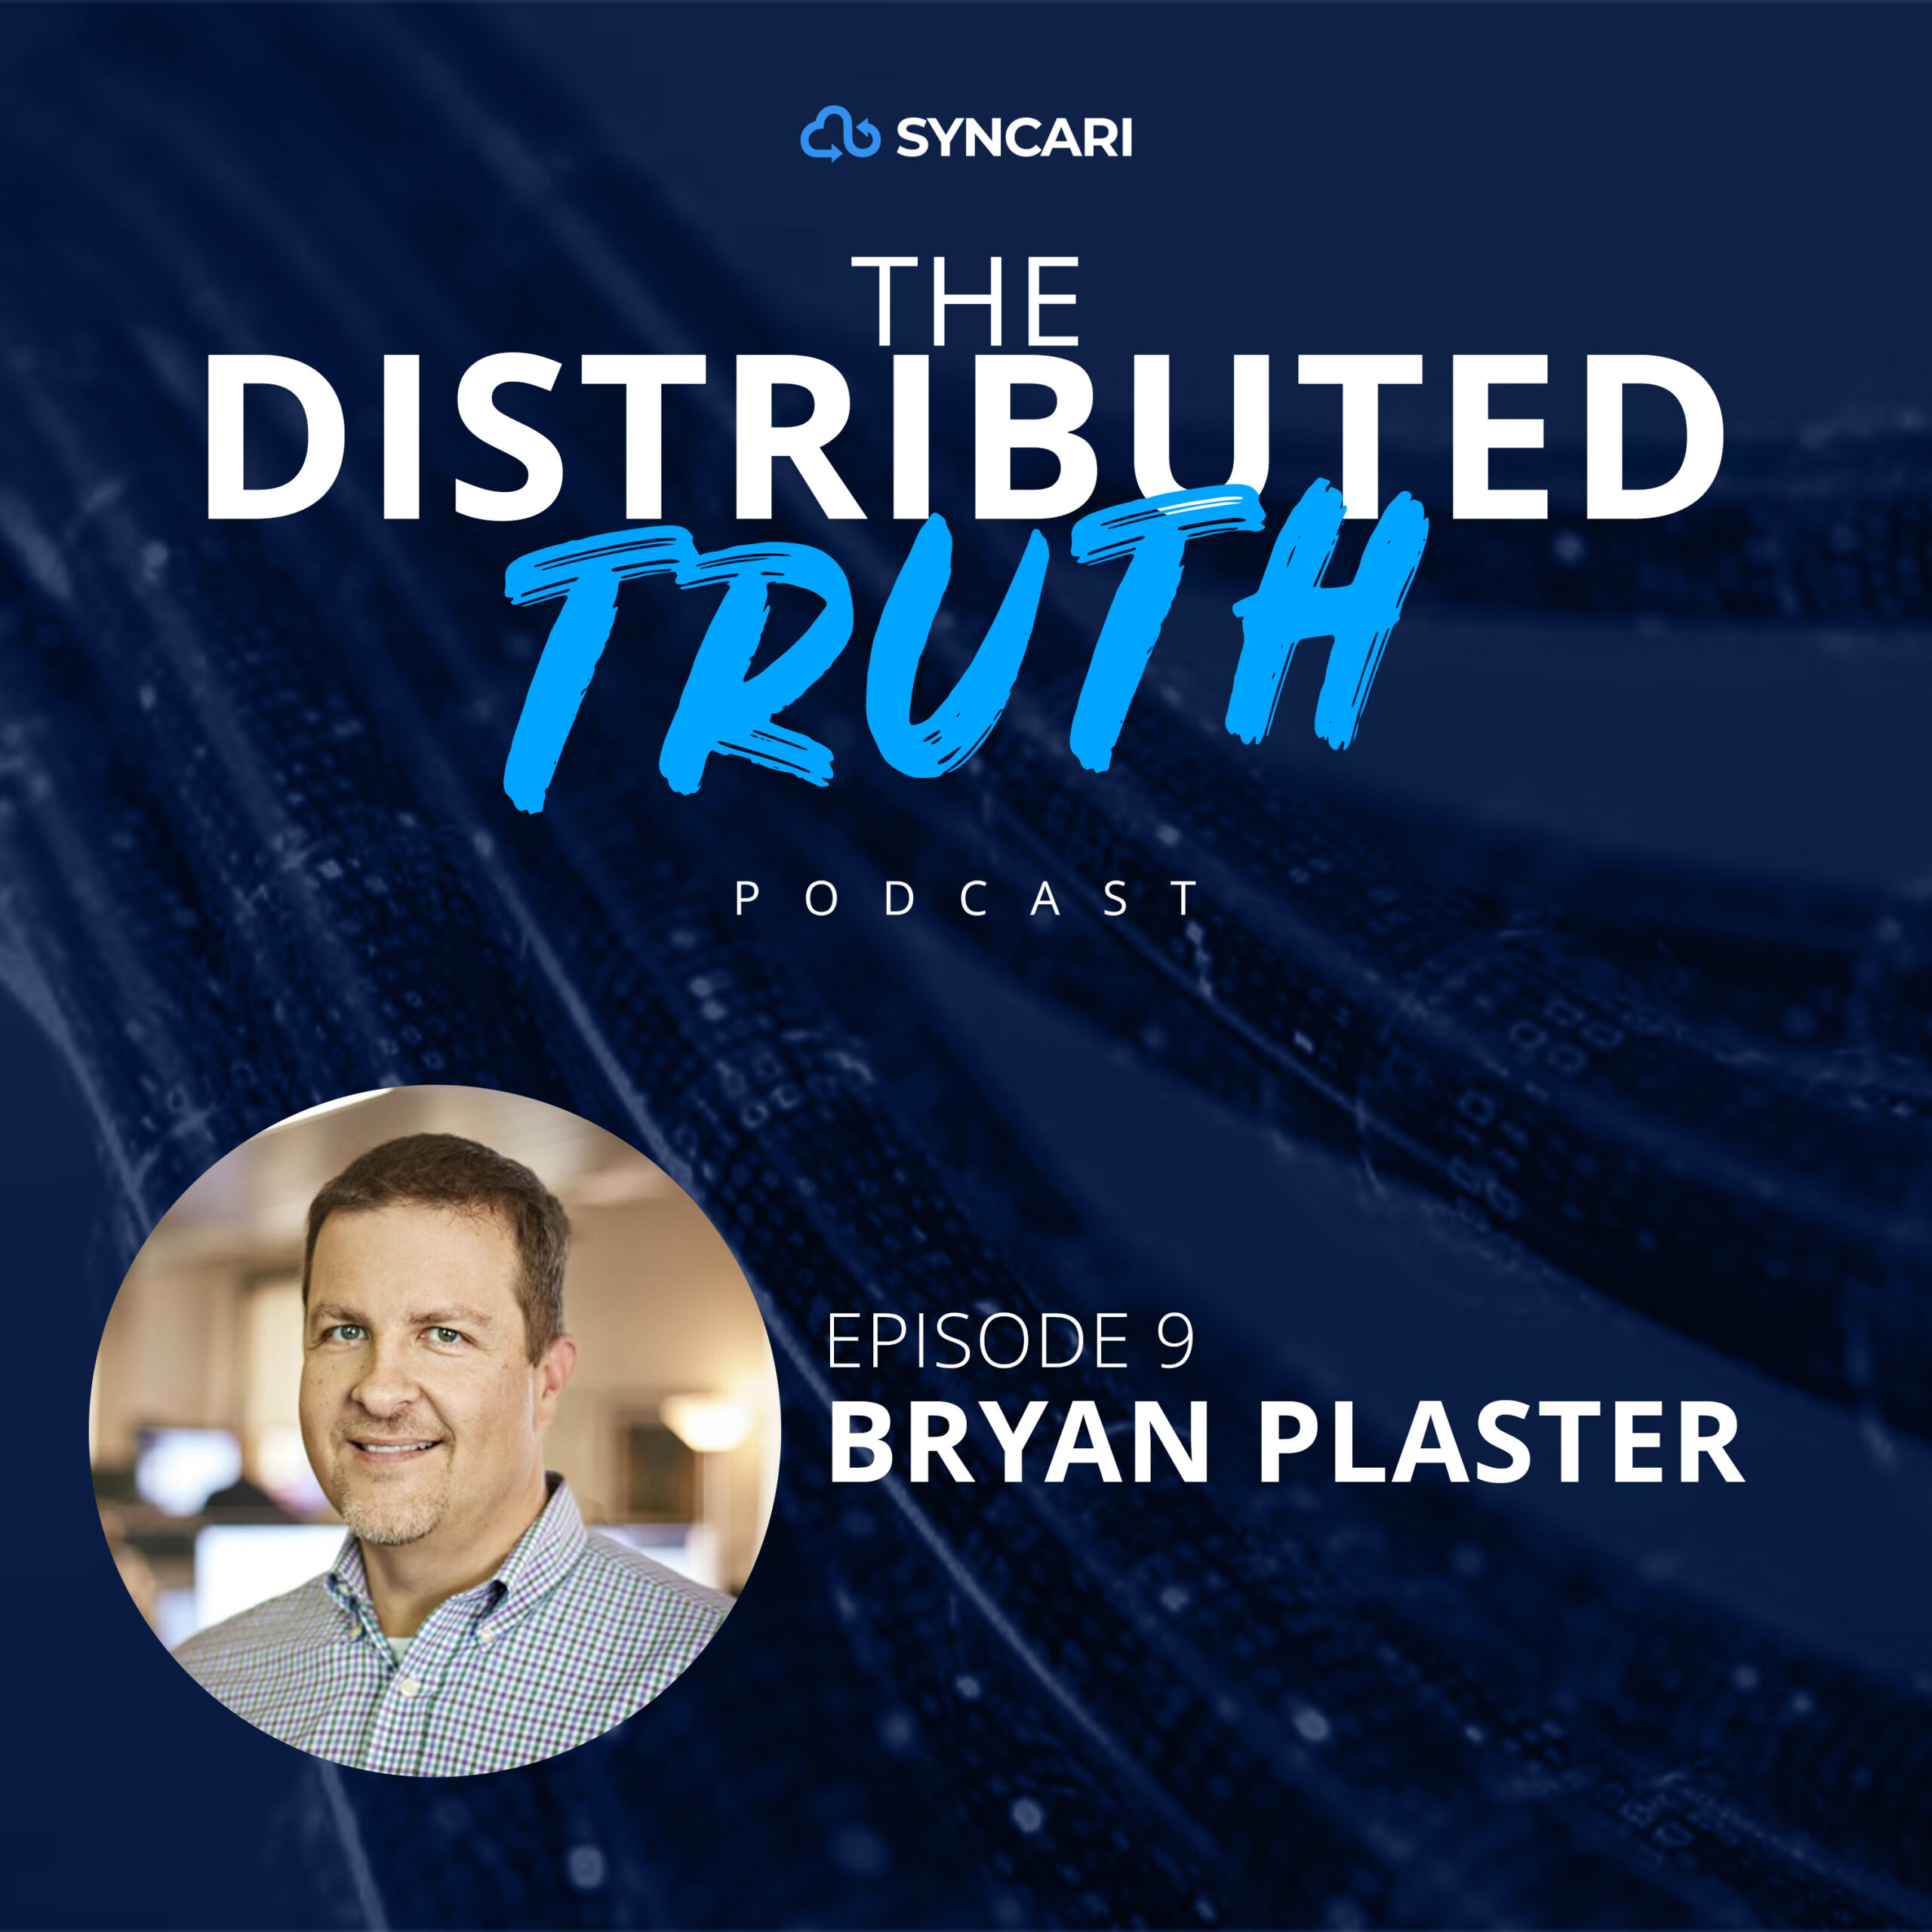 Episode 6 of The Distributed Truth with Bryan Plaster